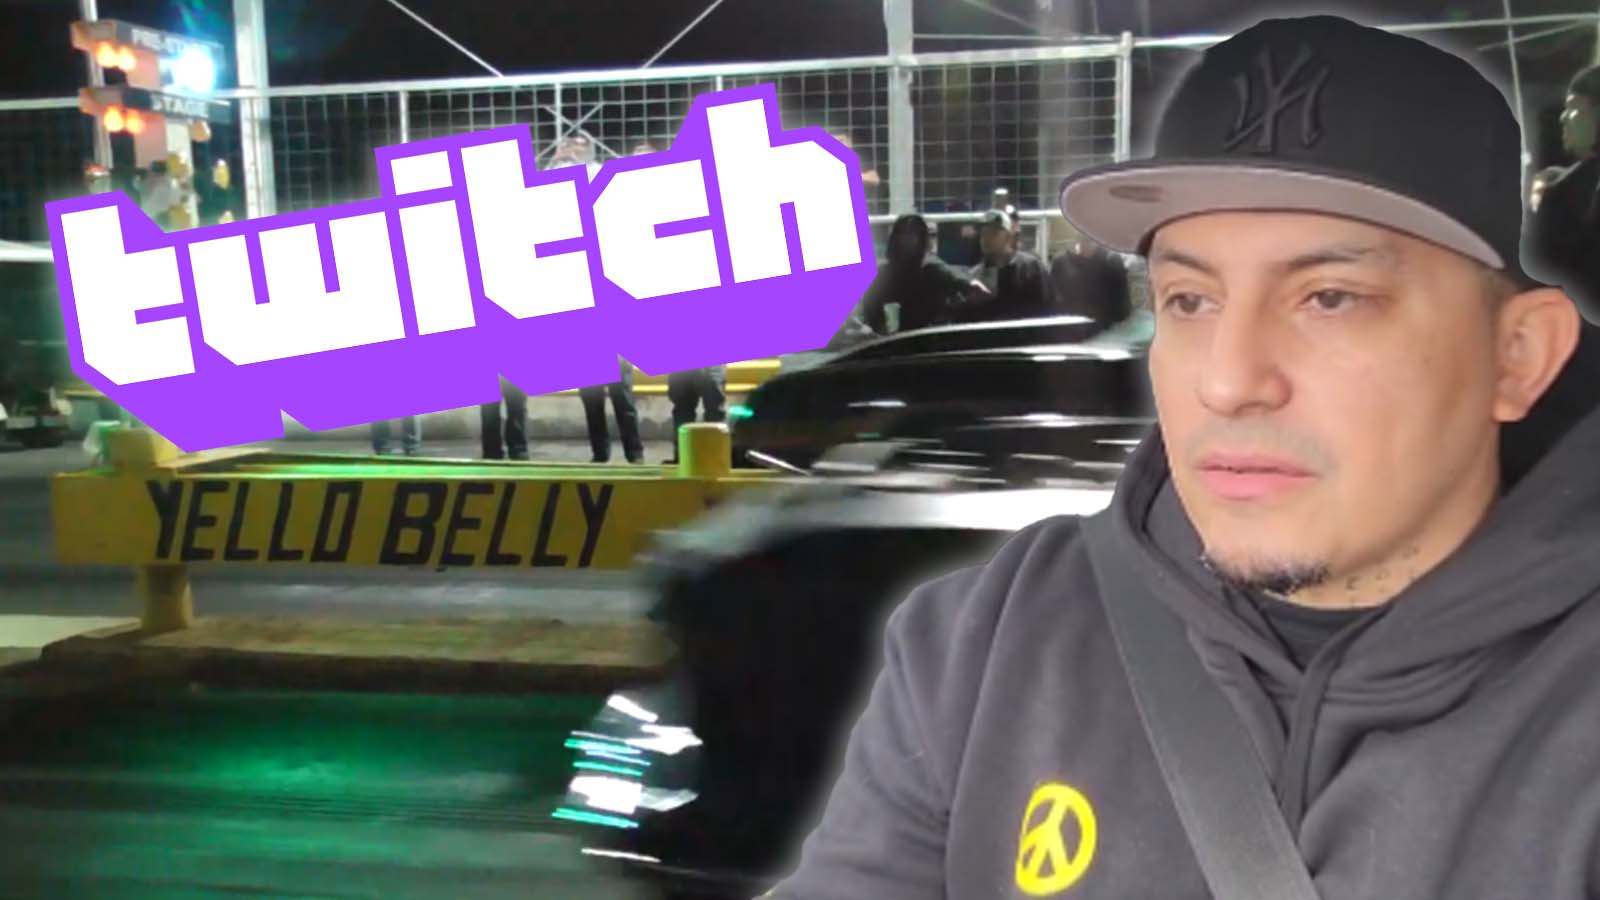 IRL Twitch streamer shocked as high-speed car crash happens right